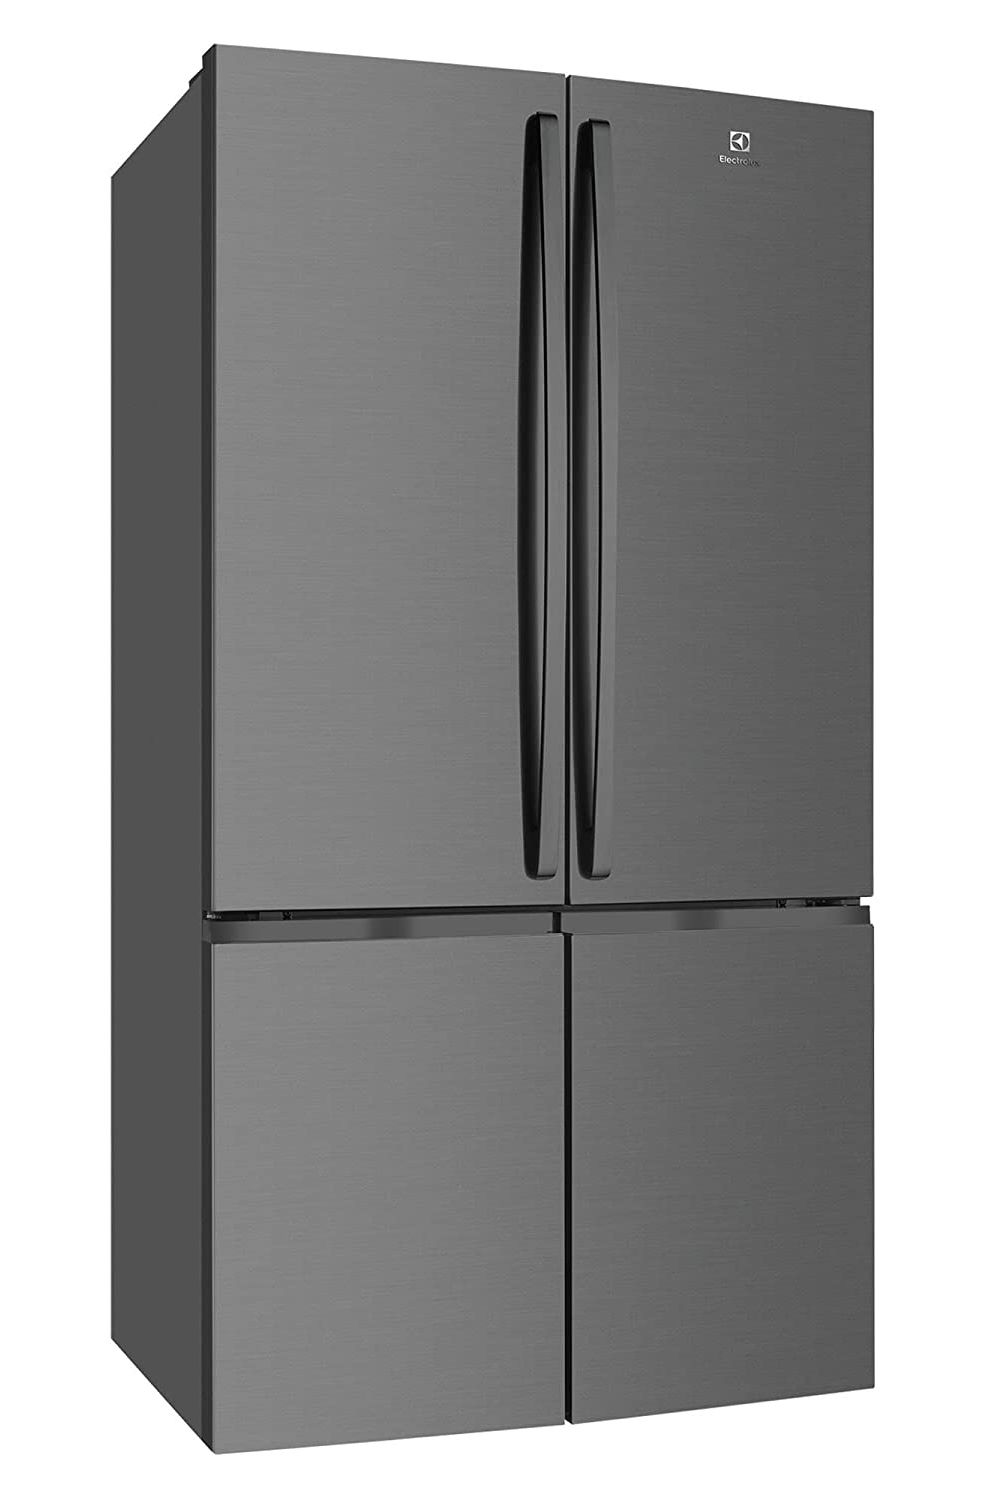 Electrolux 600L Frost Free Inverter French Door Refrigerator